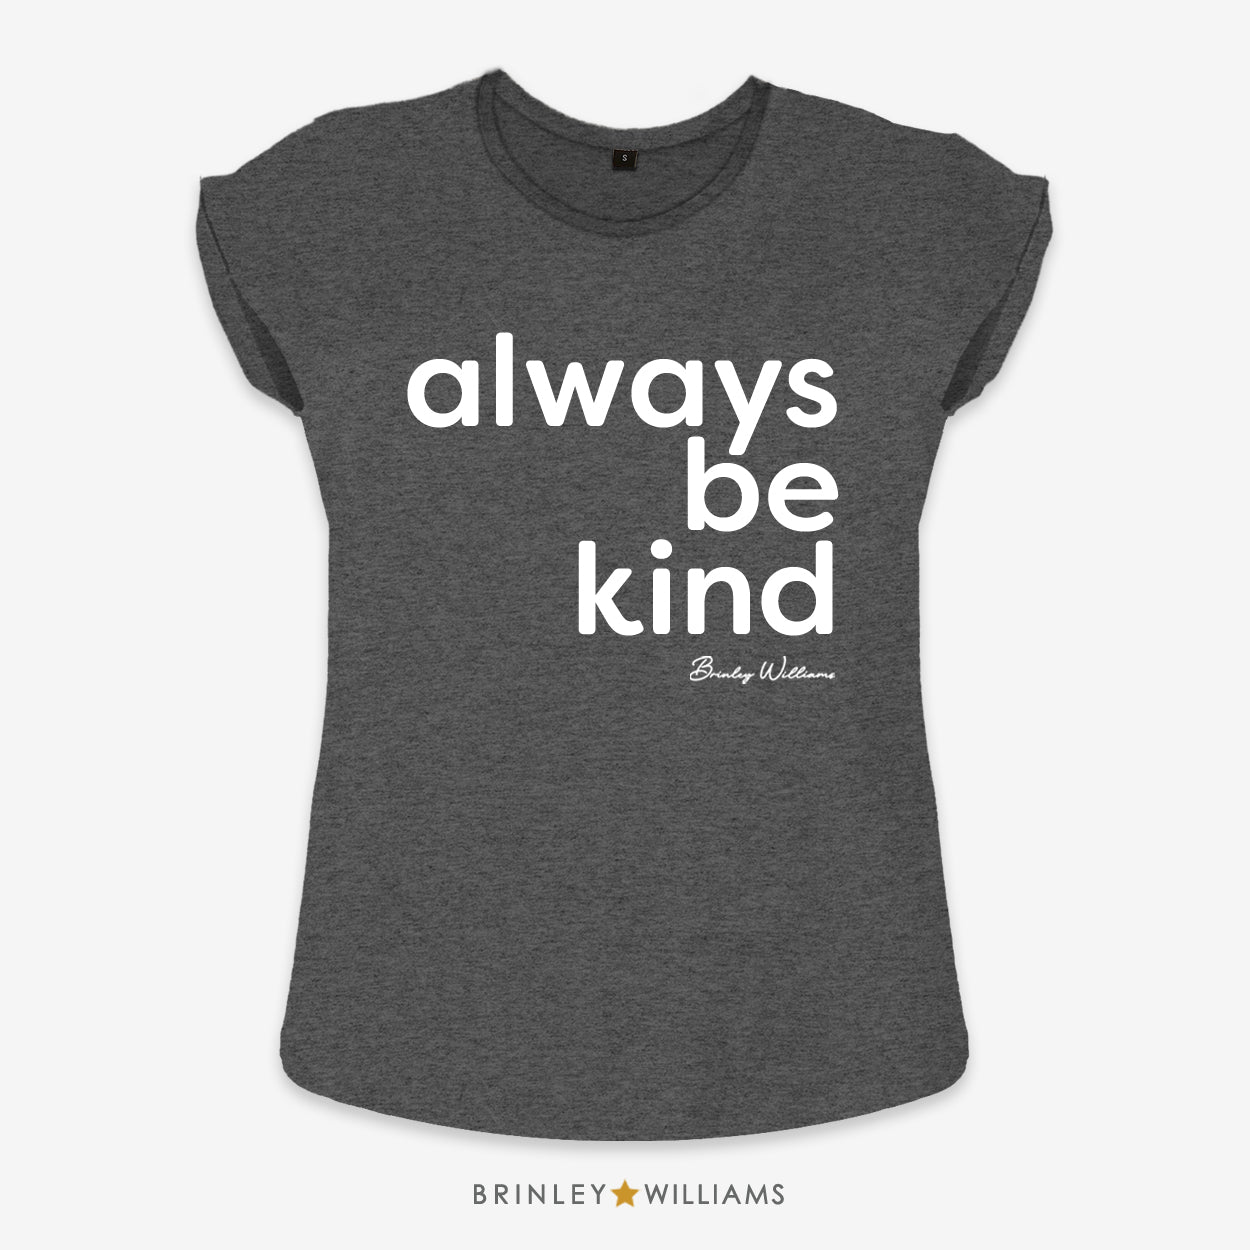 Always be Kind Rolled Sleeve T-shirt - Charcoal